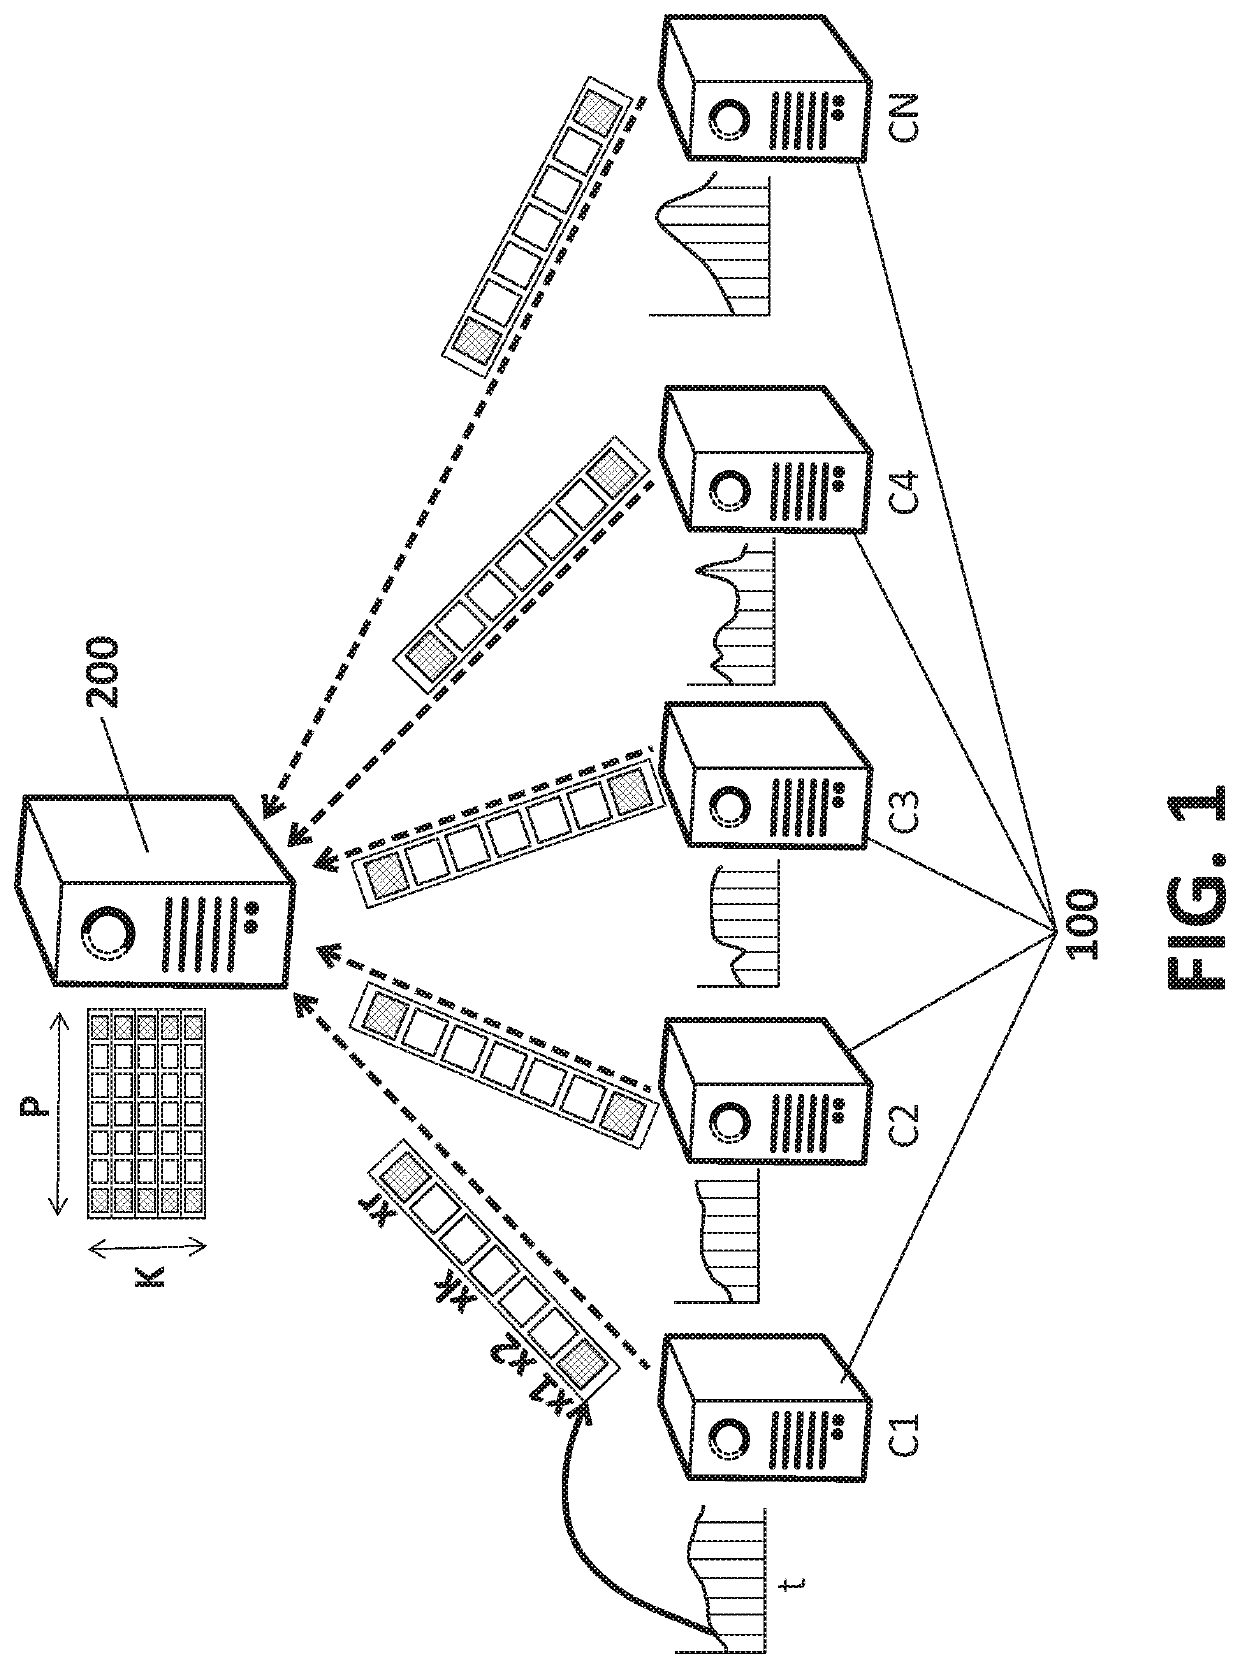 Method and system for optimizing event prediction in data systems